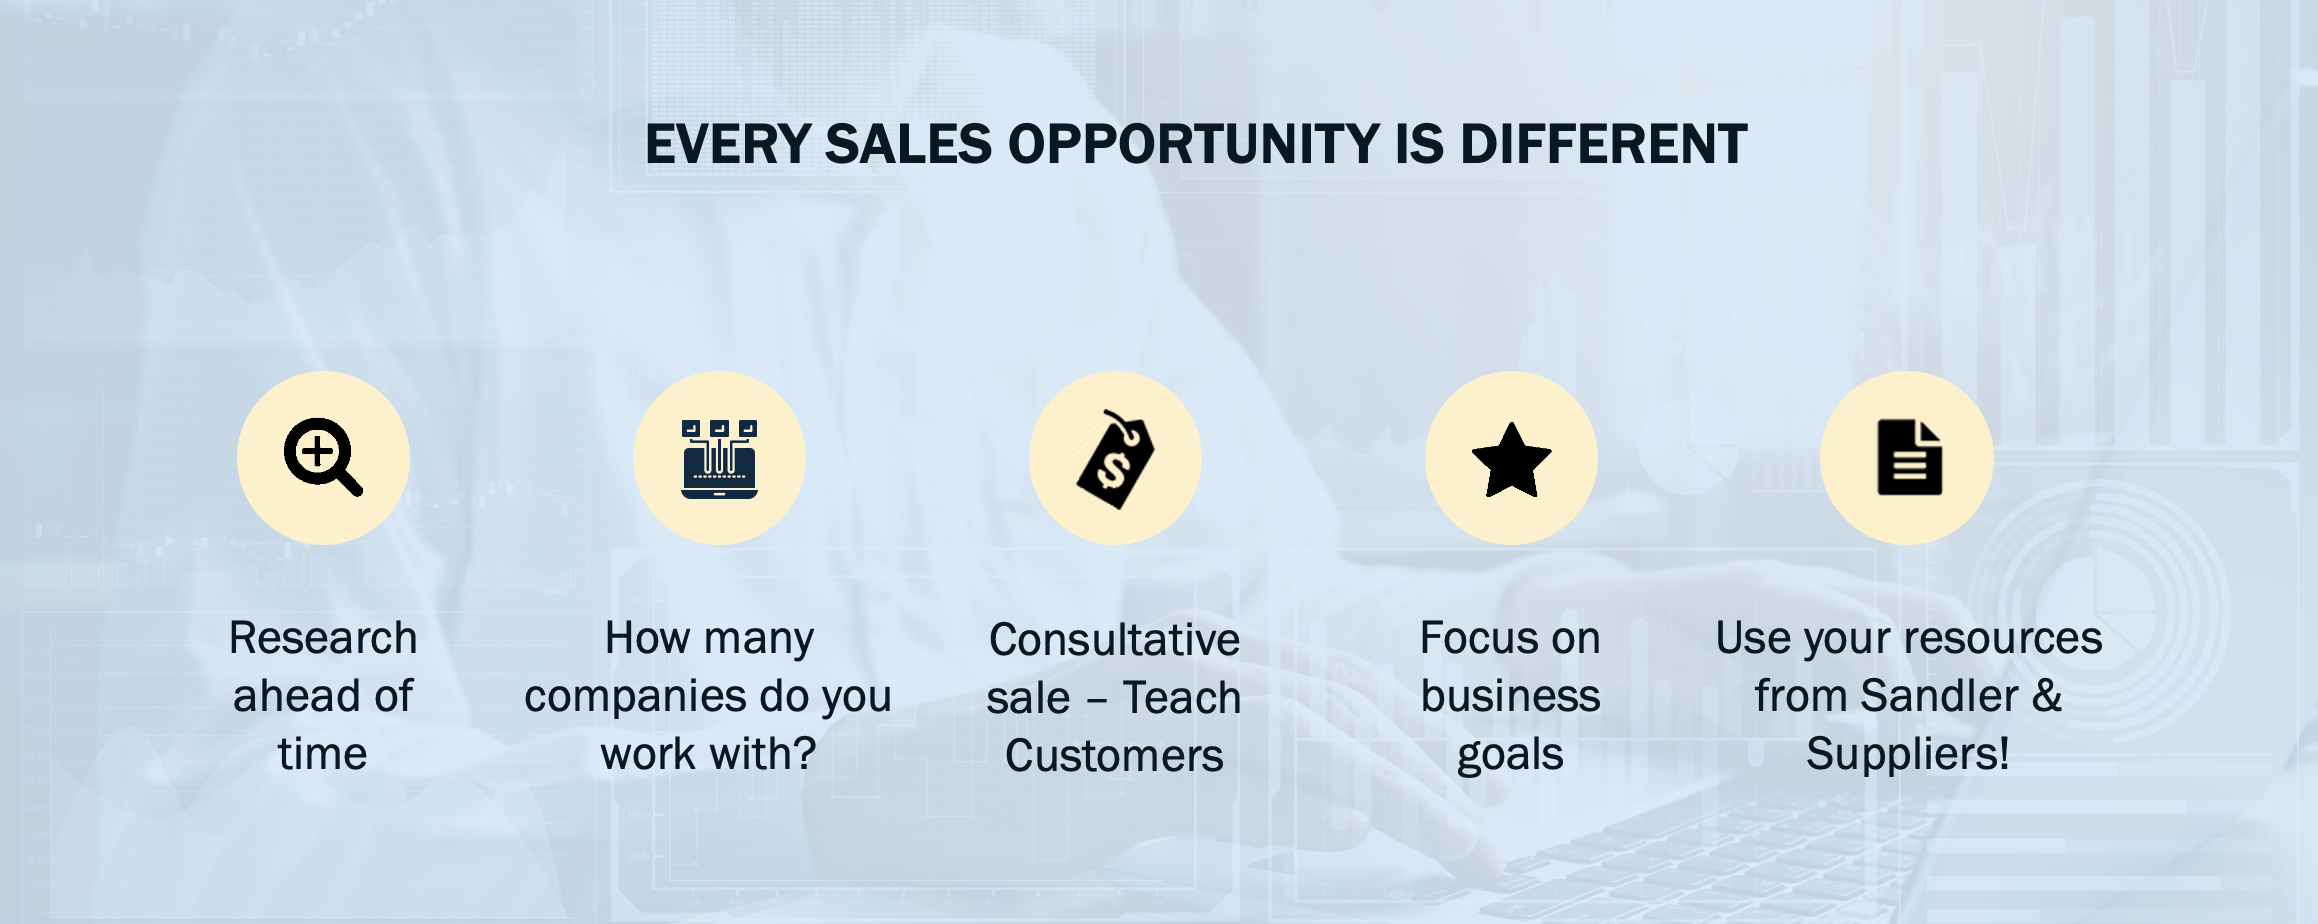 Every sales opportunity is different!